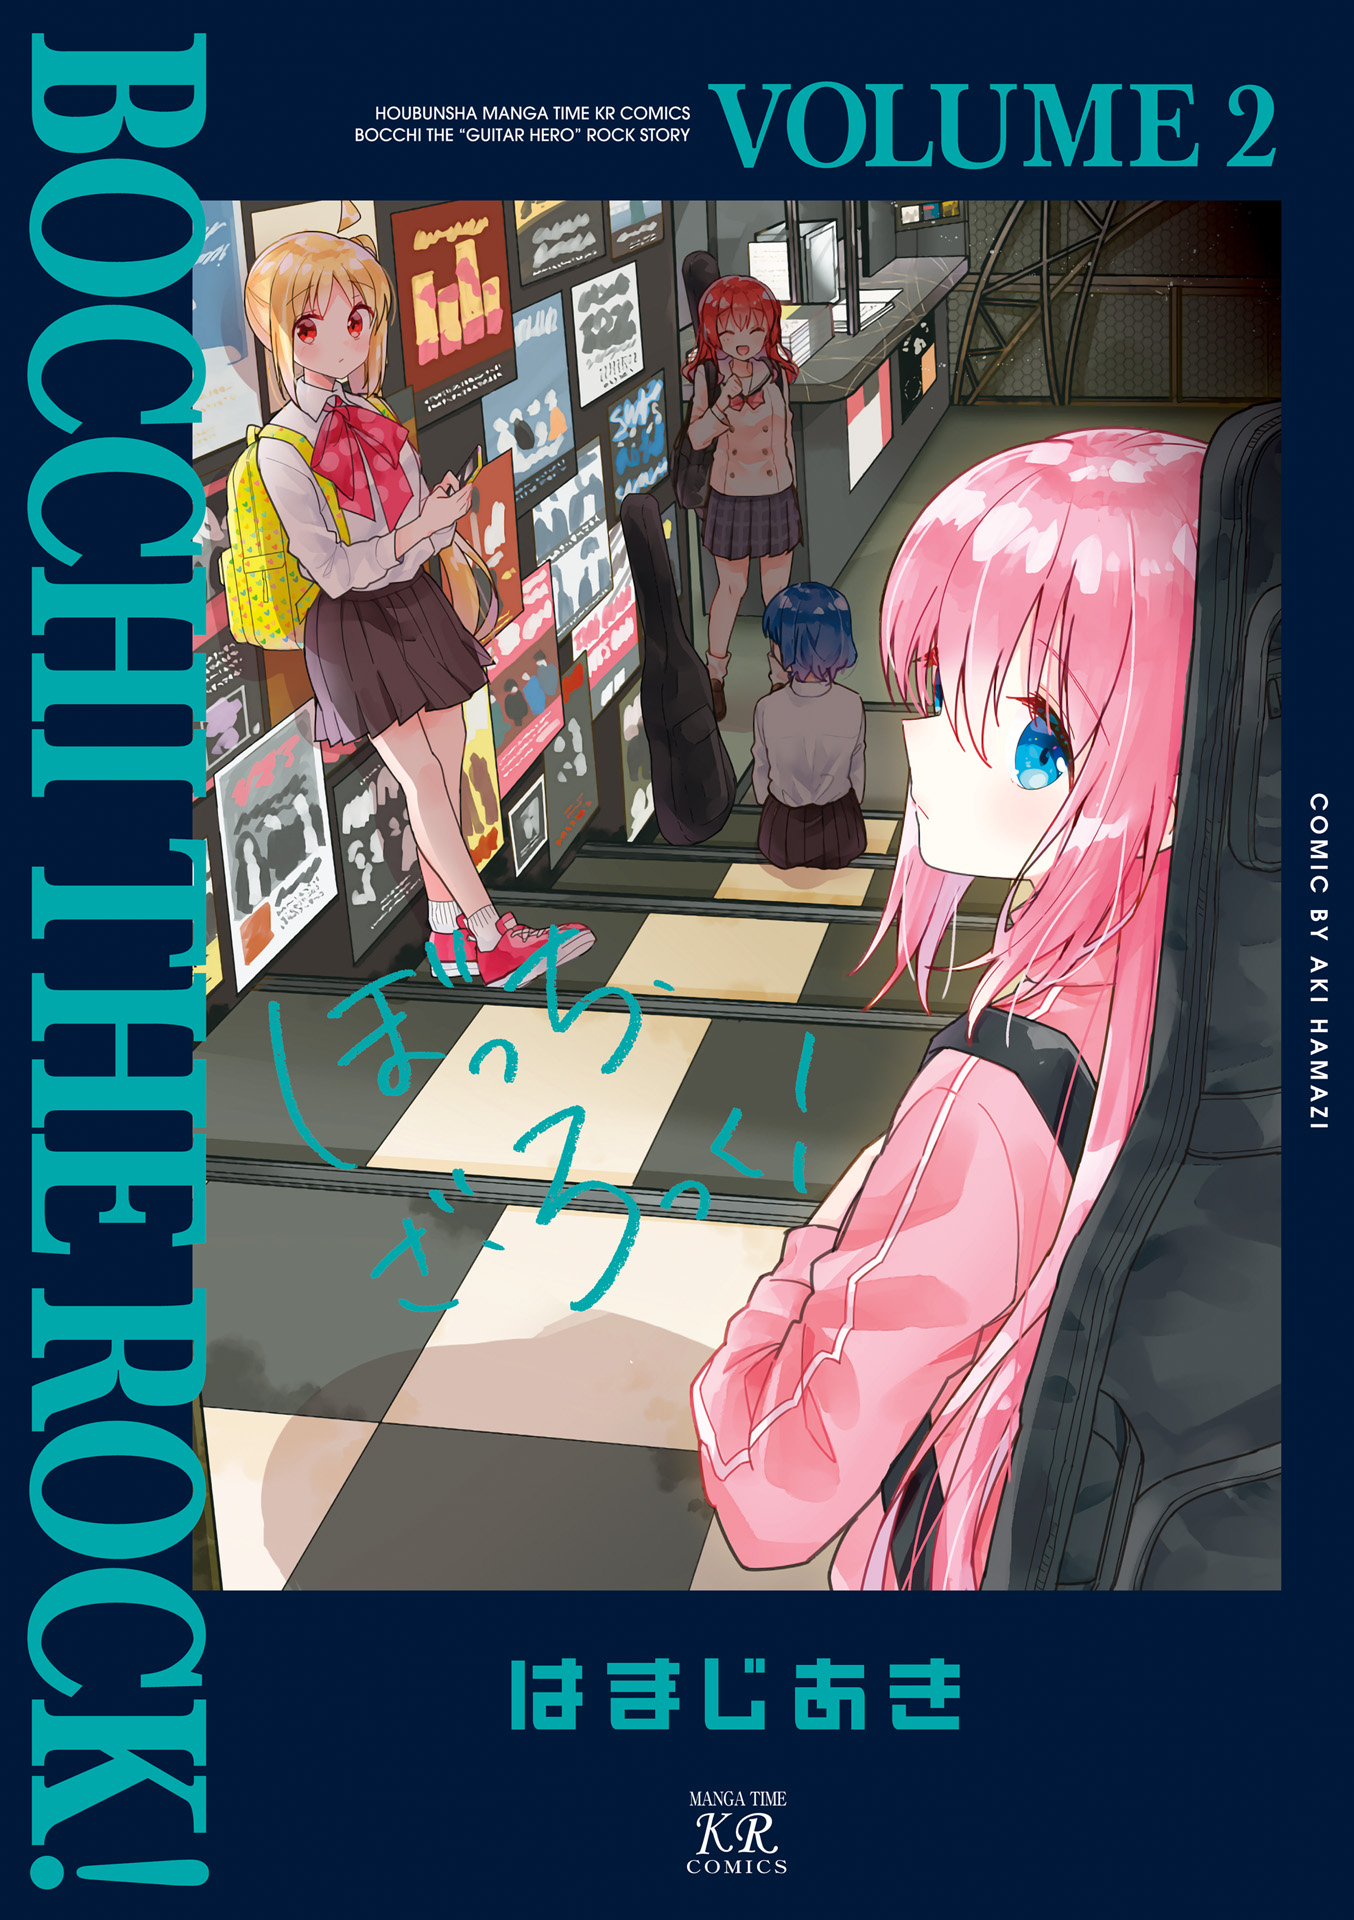 Music Store Manager (Bocchi the Rock!) - Clubs 